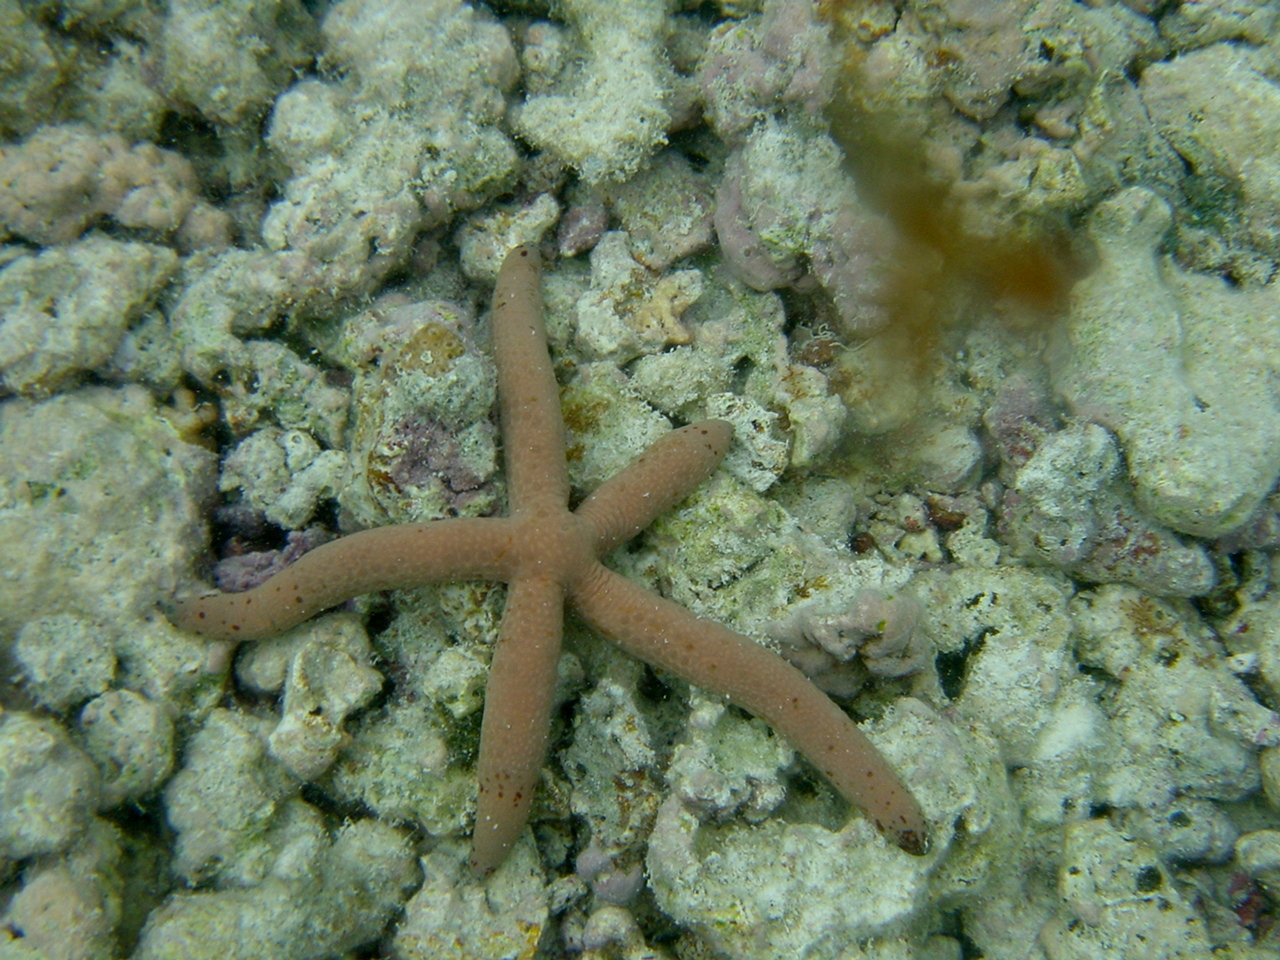 A small brown starfish (Linckia multifora) - a spotted linckia